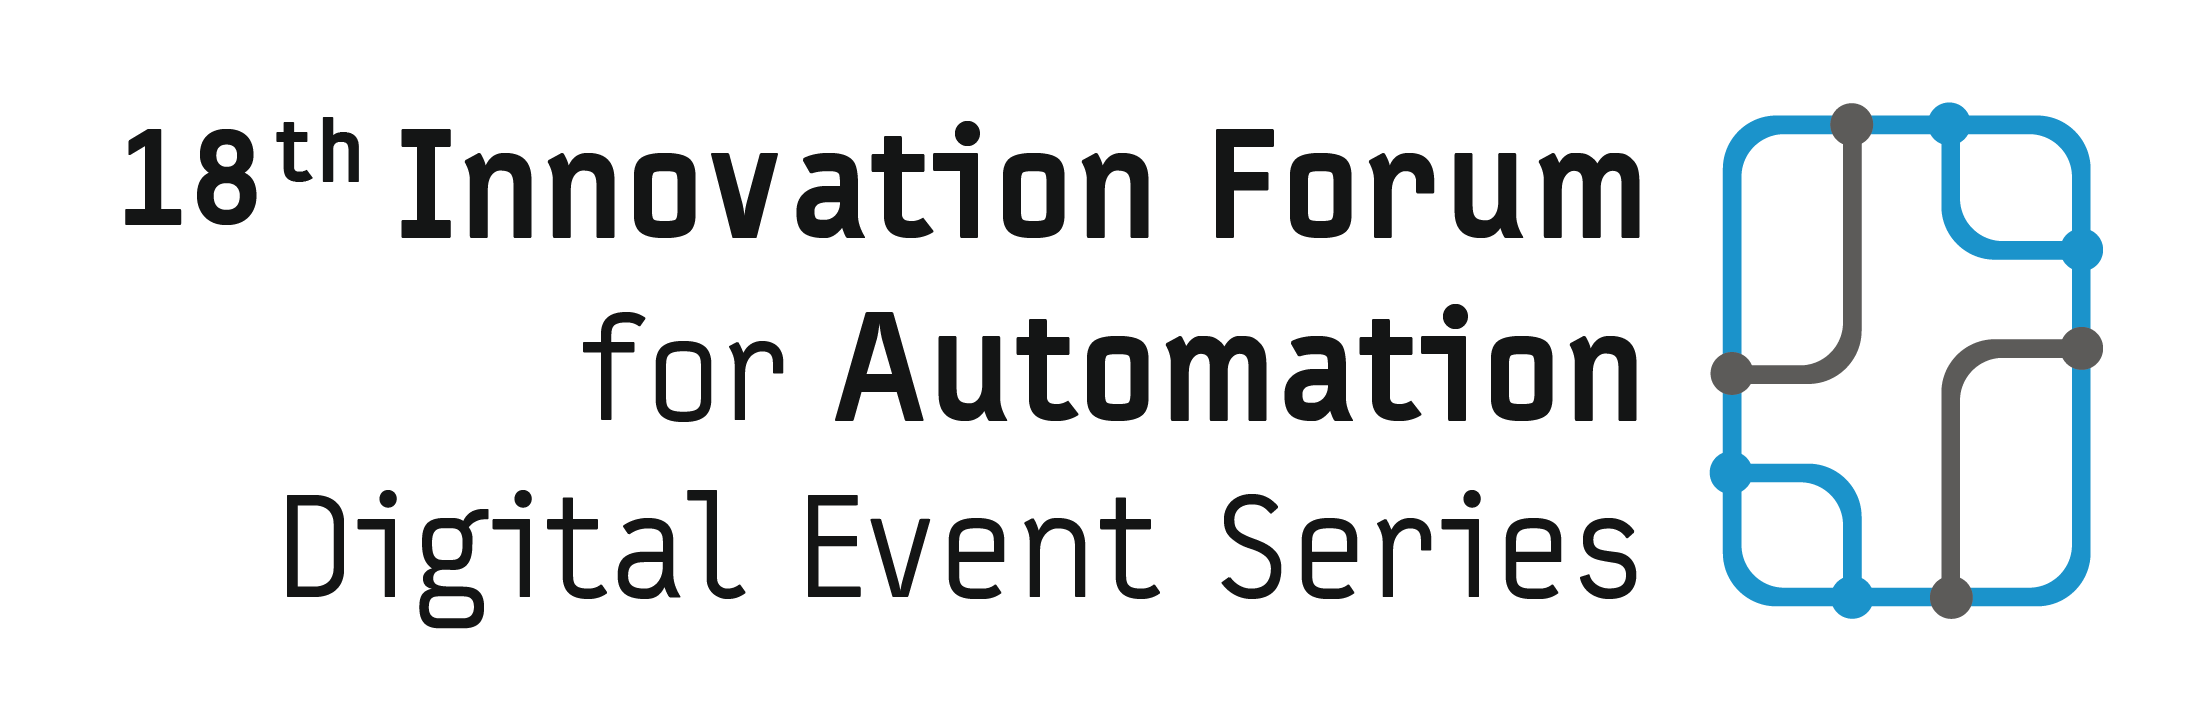 18th Innovation Forum for Automation – Session 2, hosted by Fabmatics image